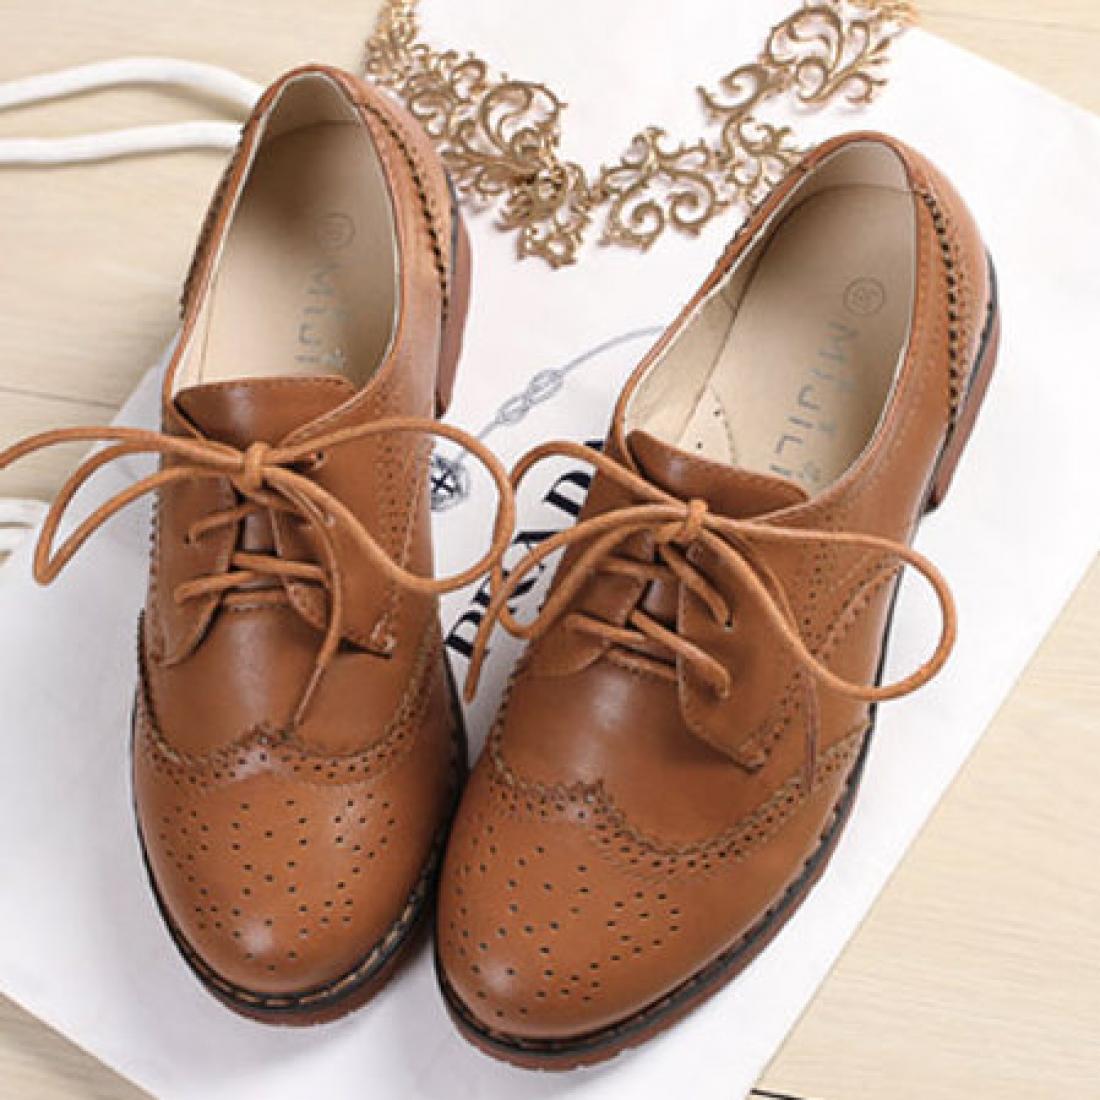 Brown leather Oxford shoes